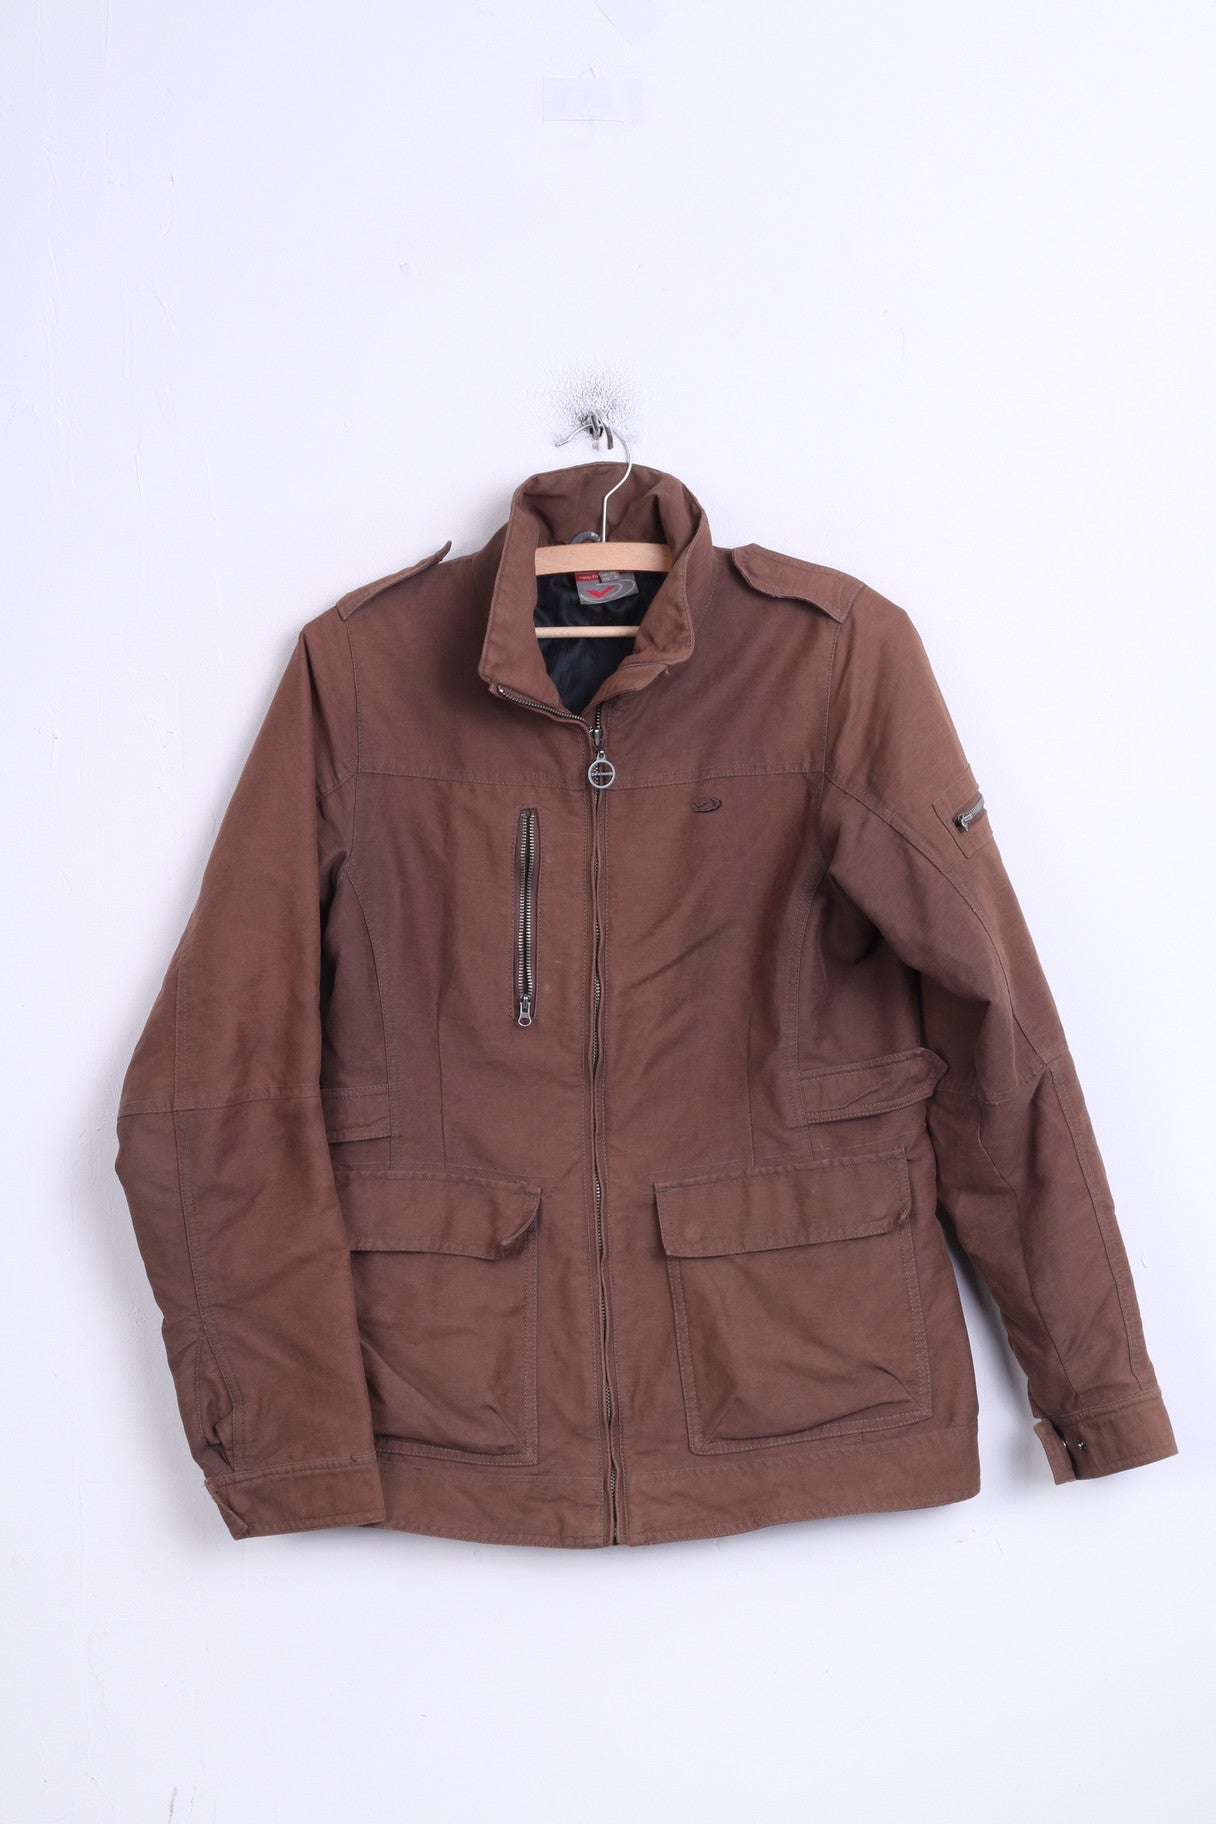 FIVE Womens 38 M Jacket Brown Cotton Padded - RetrospectClothes